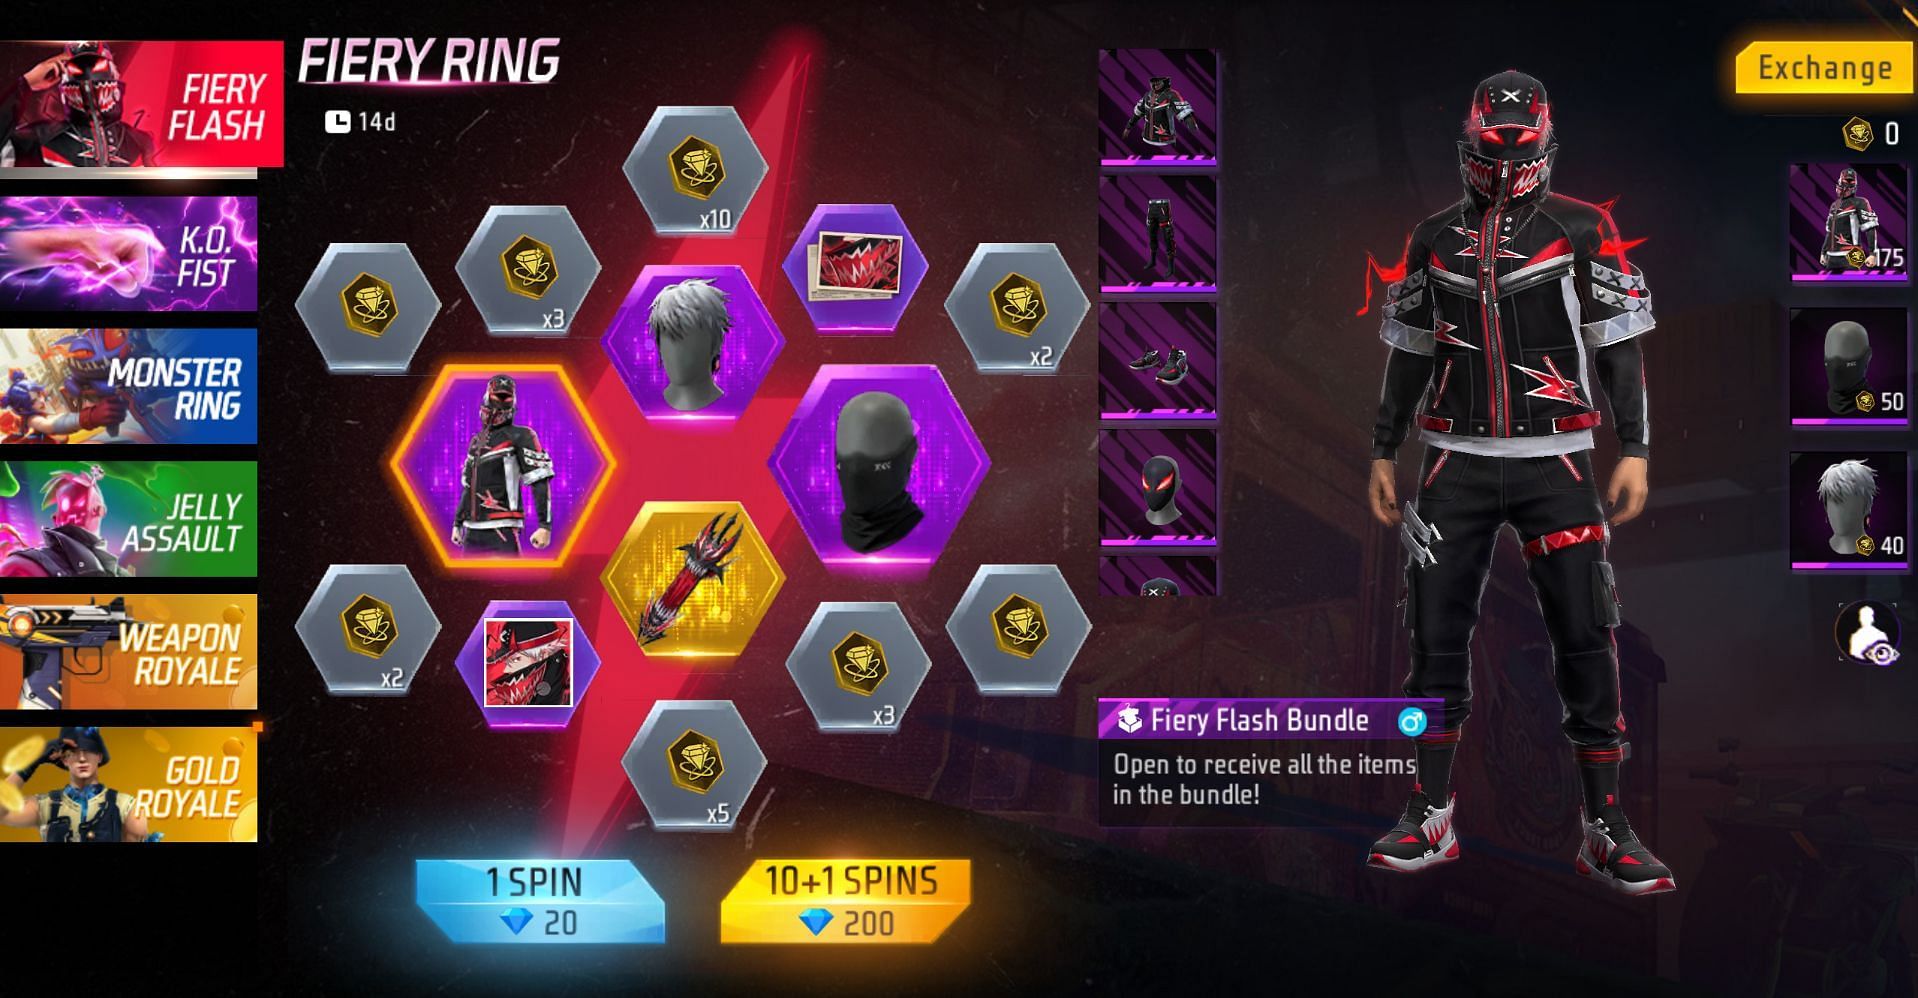 Fiery Ring event interface (Image via Garena)